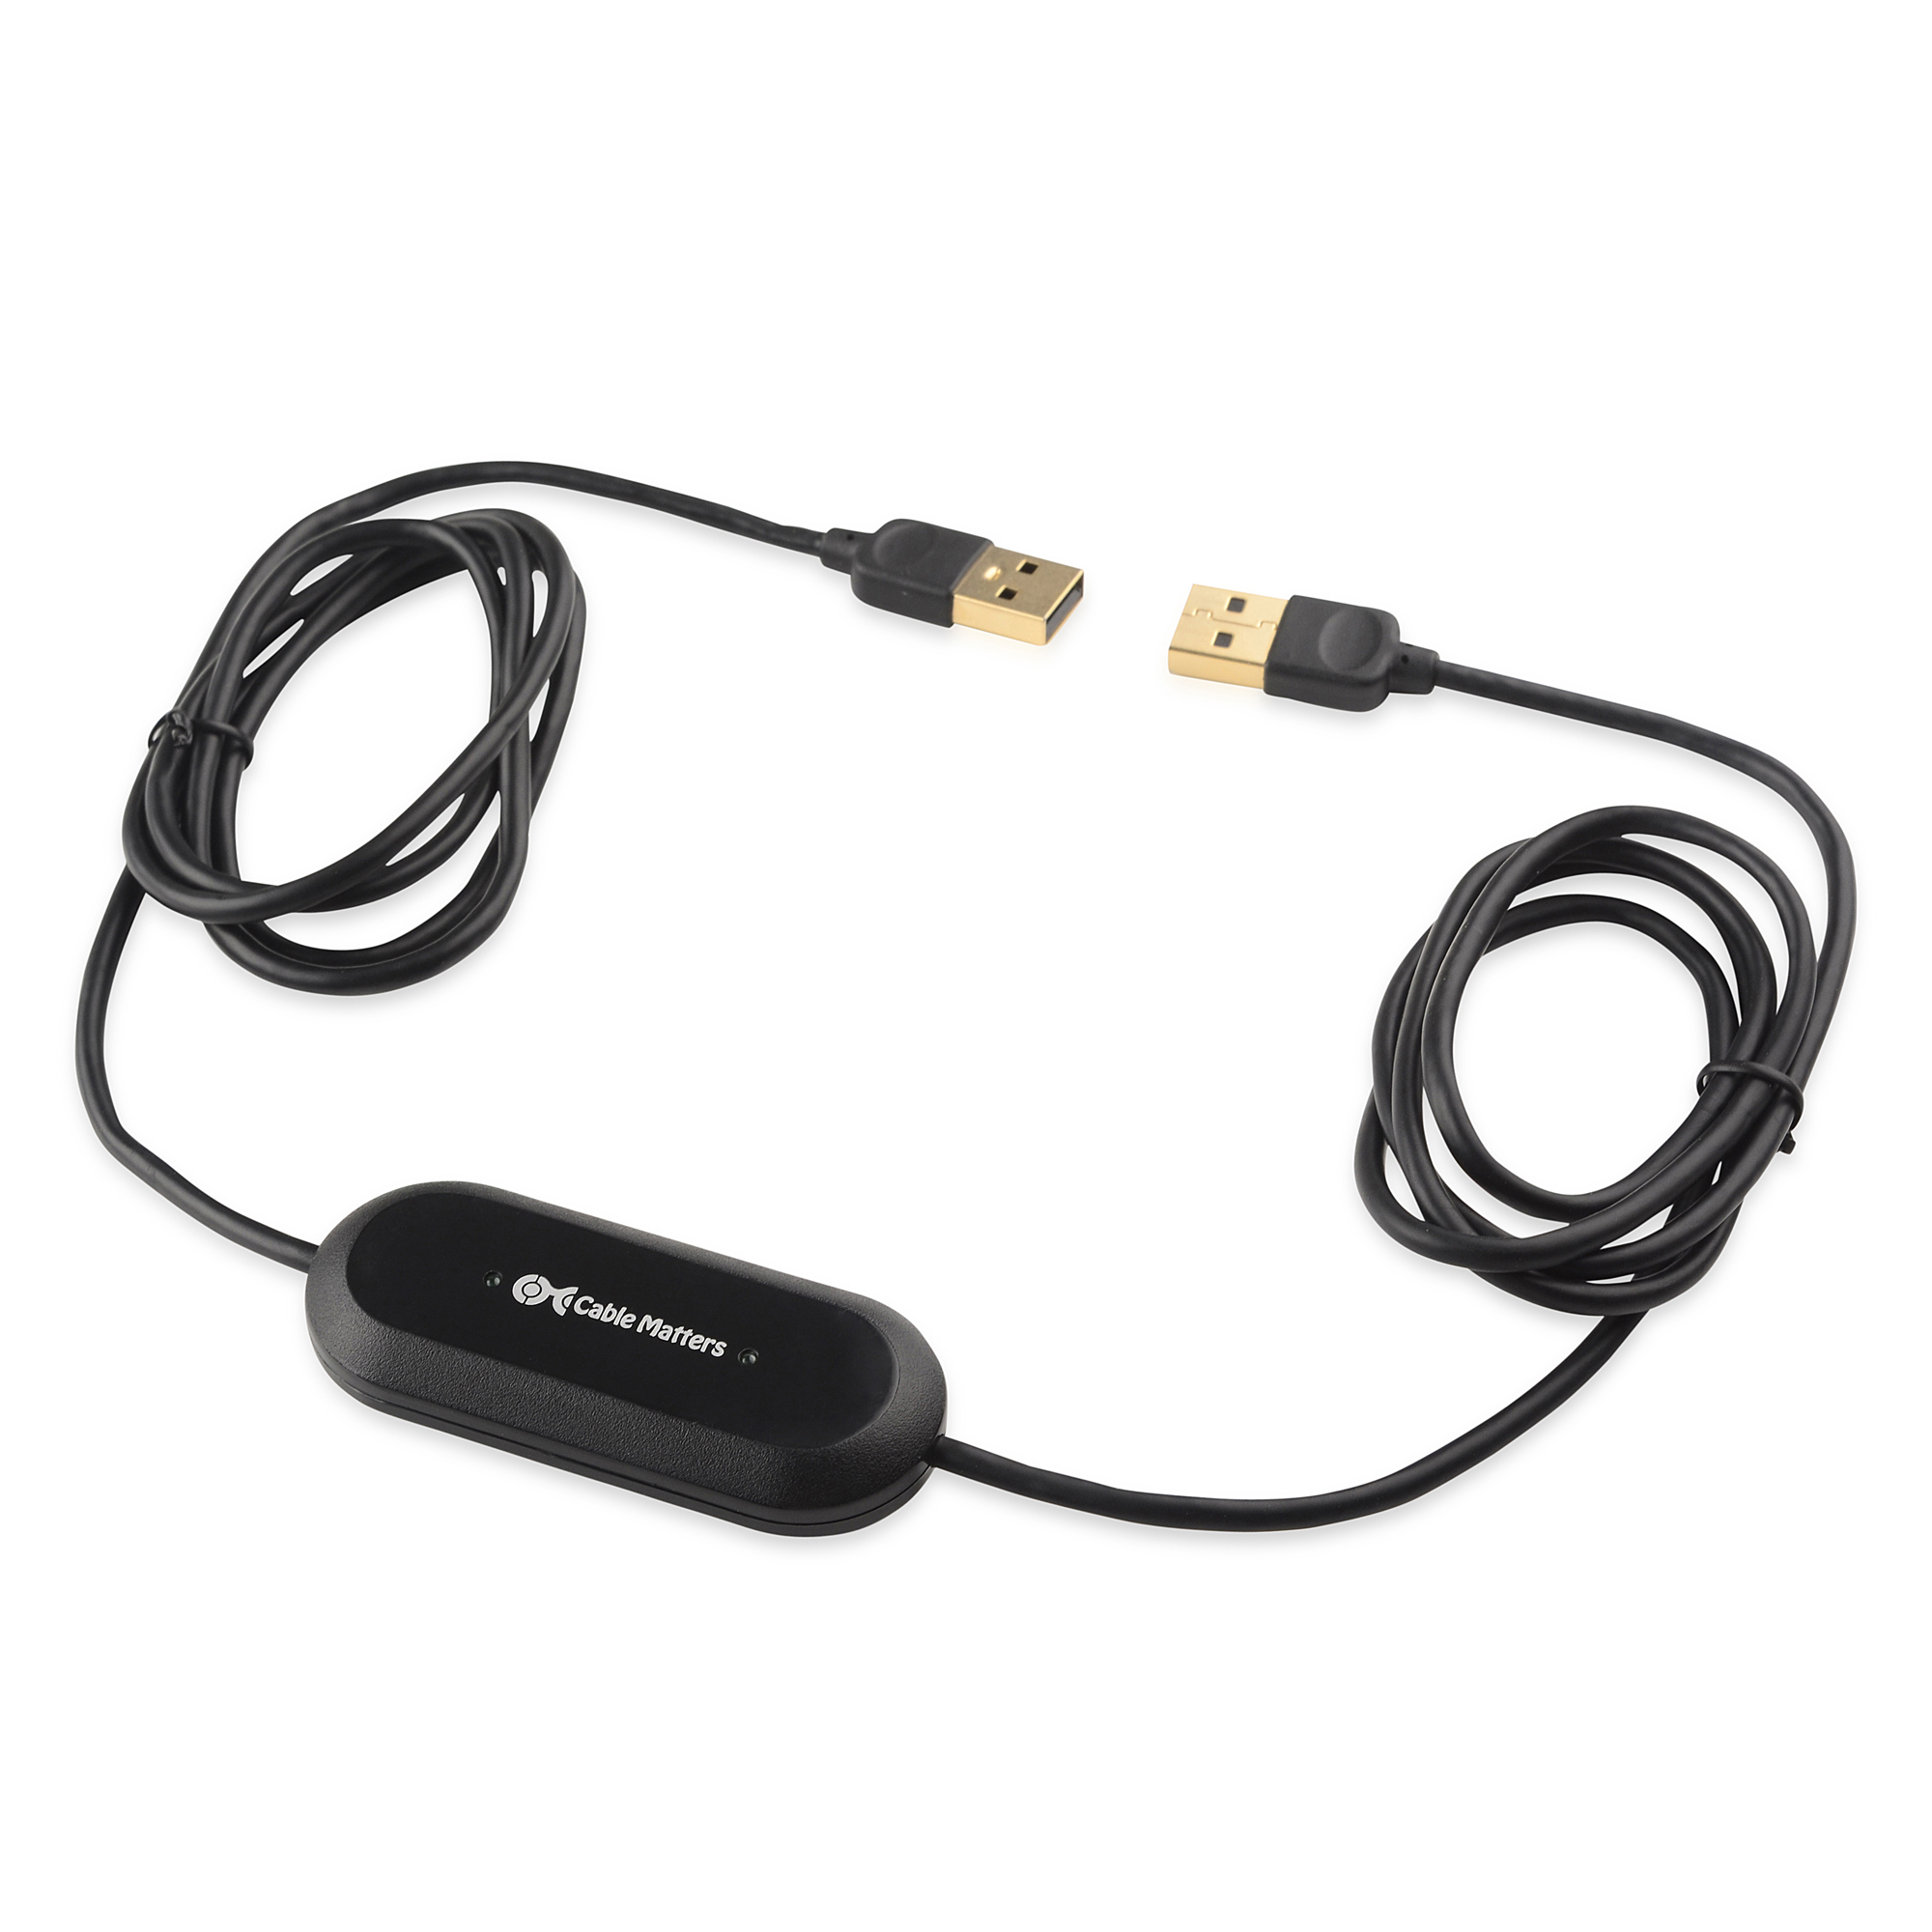 gemelo Cabecear atraer Easy Transfer Cable for Windows 10/8.1/8/7/XP/Vista - Cable Matters  Knowledge Base